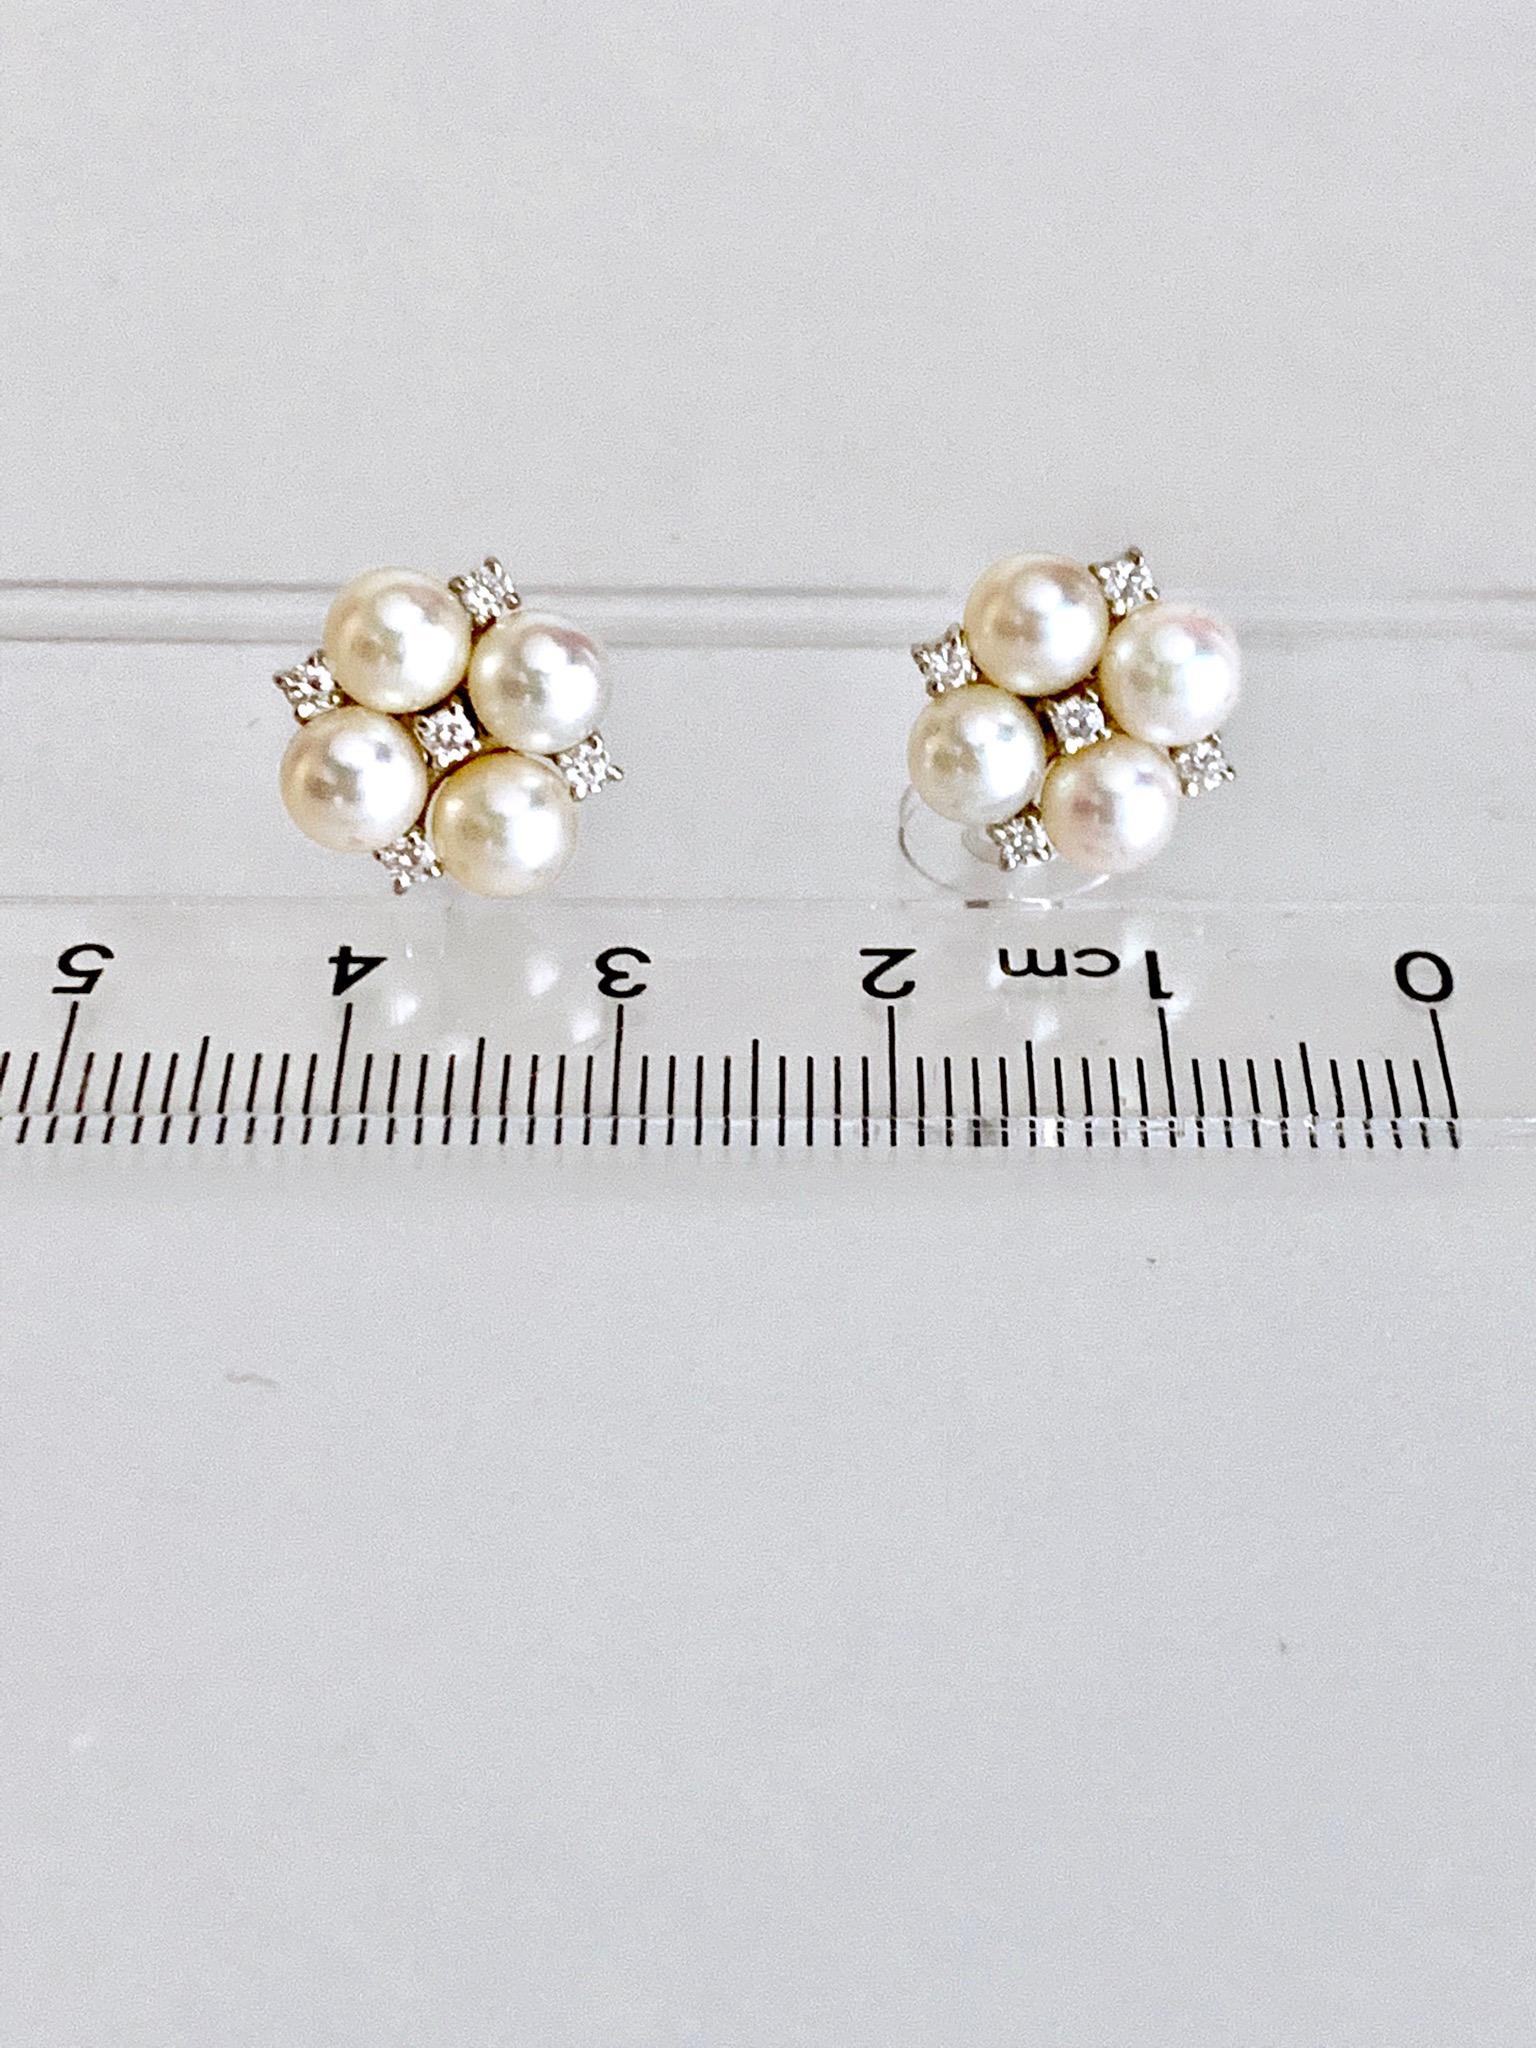 Round Cut Gemolithos Cultured Pearls and Diamond Earrings 18 Karat, for Every Day For Sale